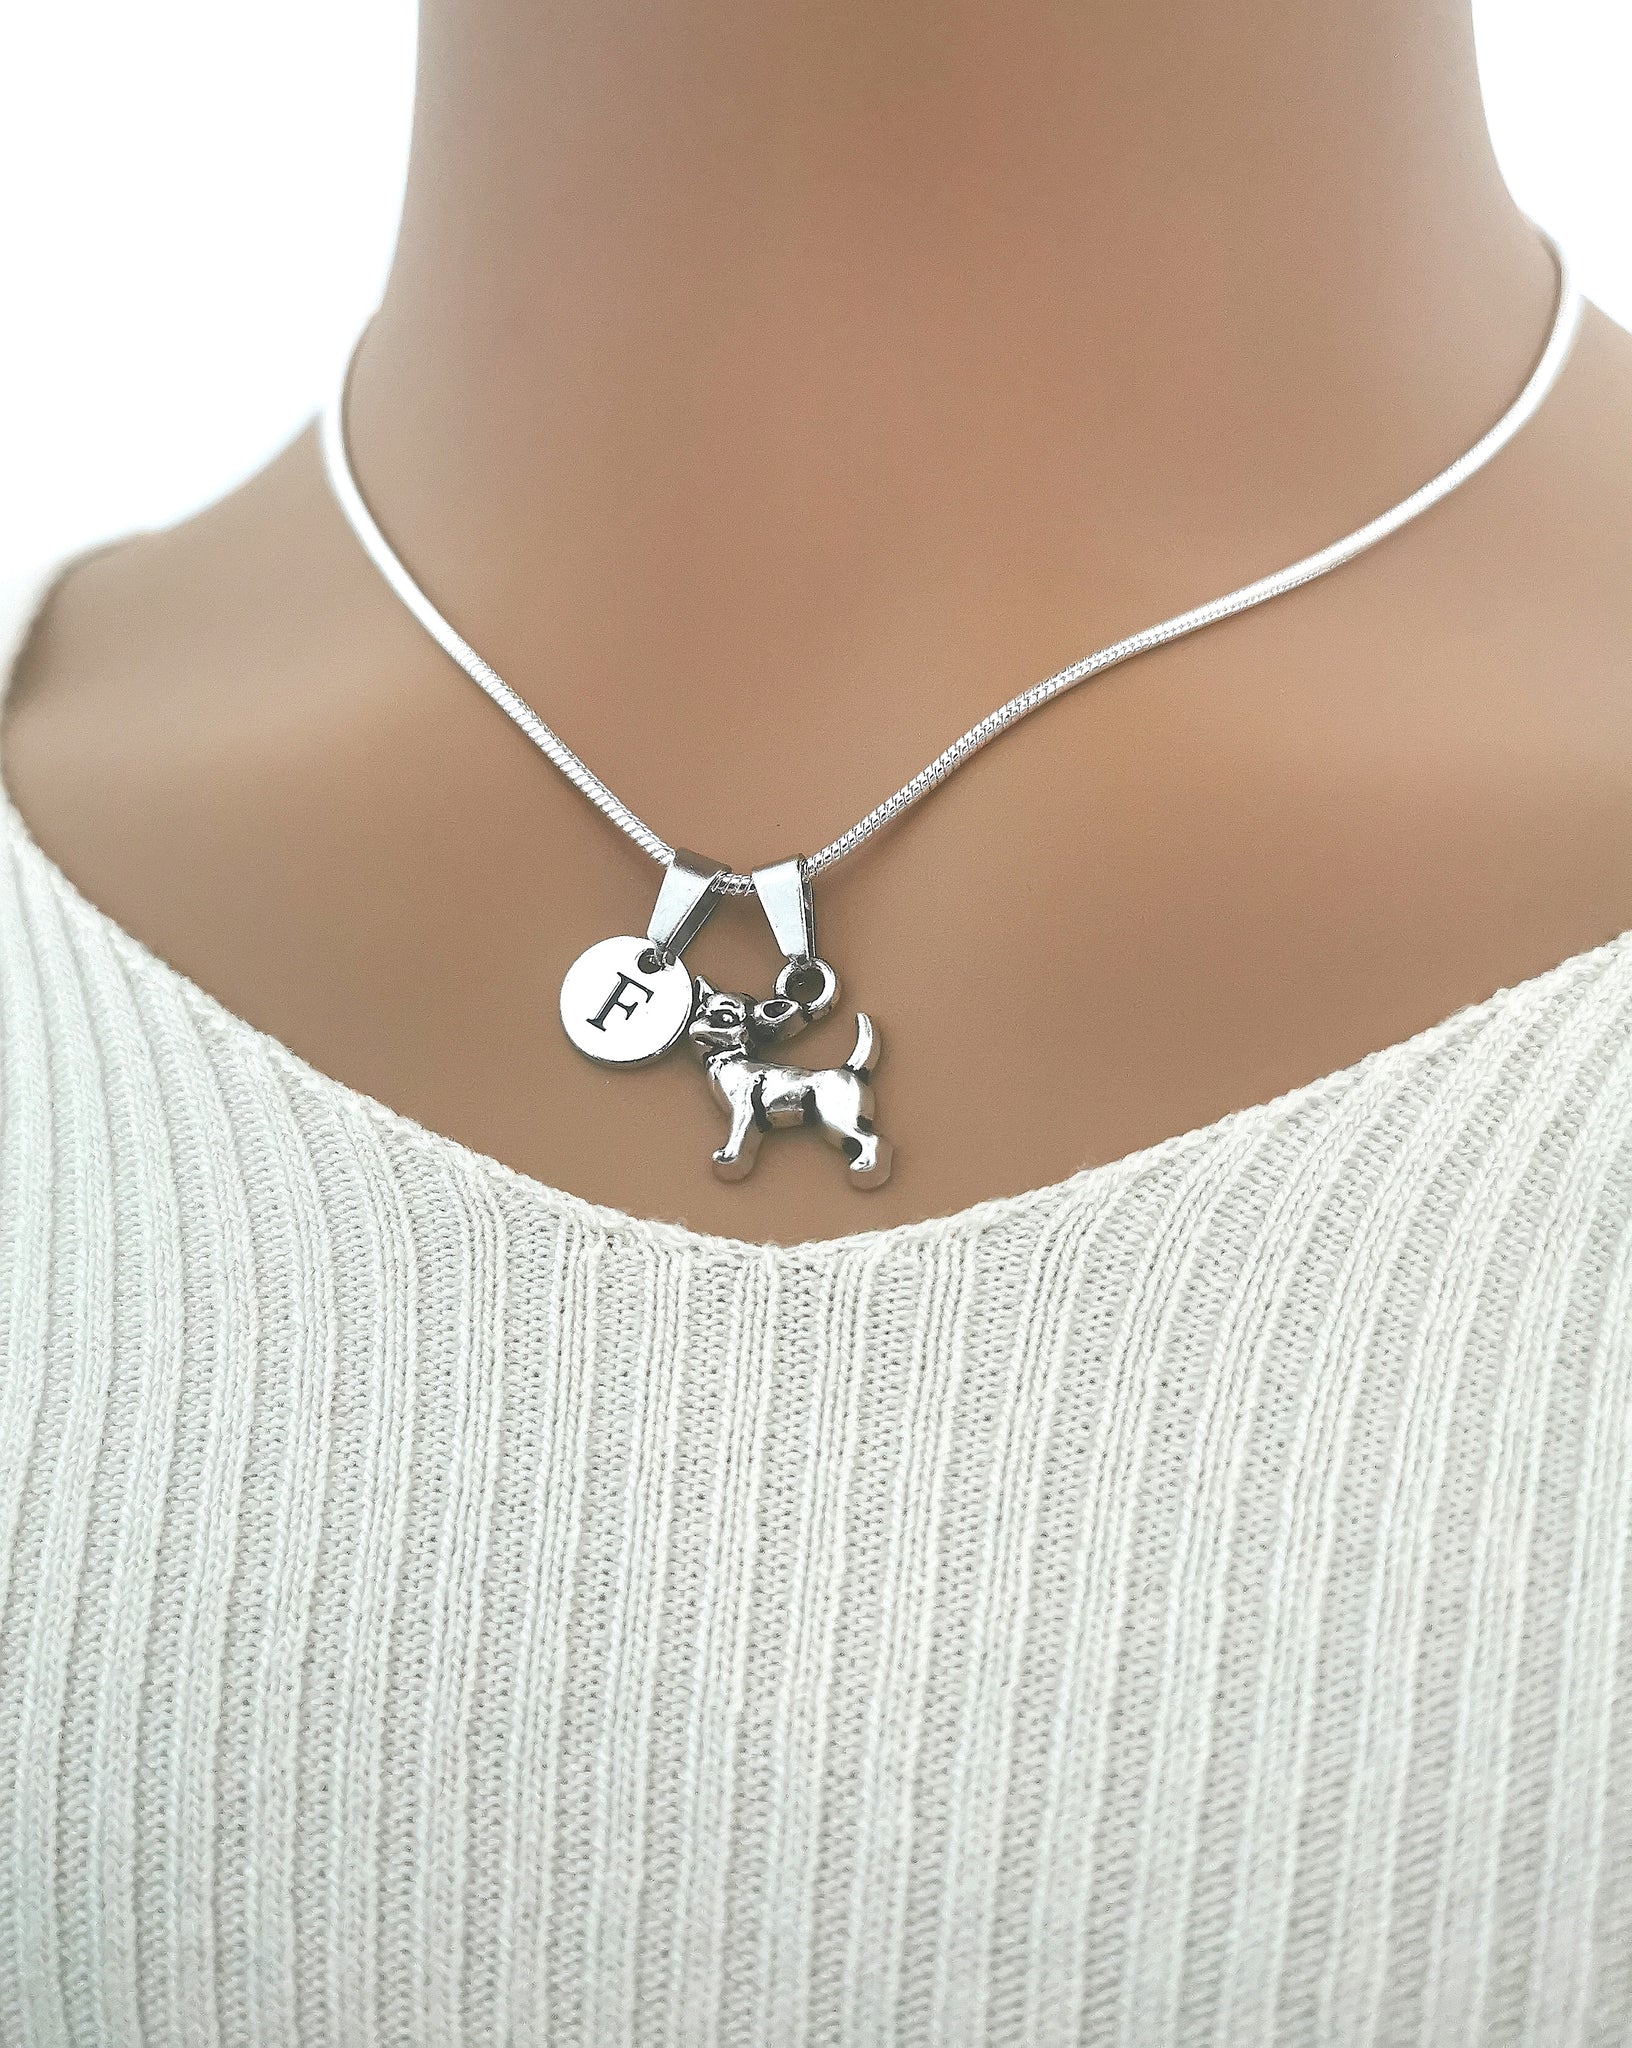 Silver Chihuahua Necklace - a refined Dog Charm Gift with an 18" length, perfect for Chihuahua enthusiasts - YouLoveYouShop